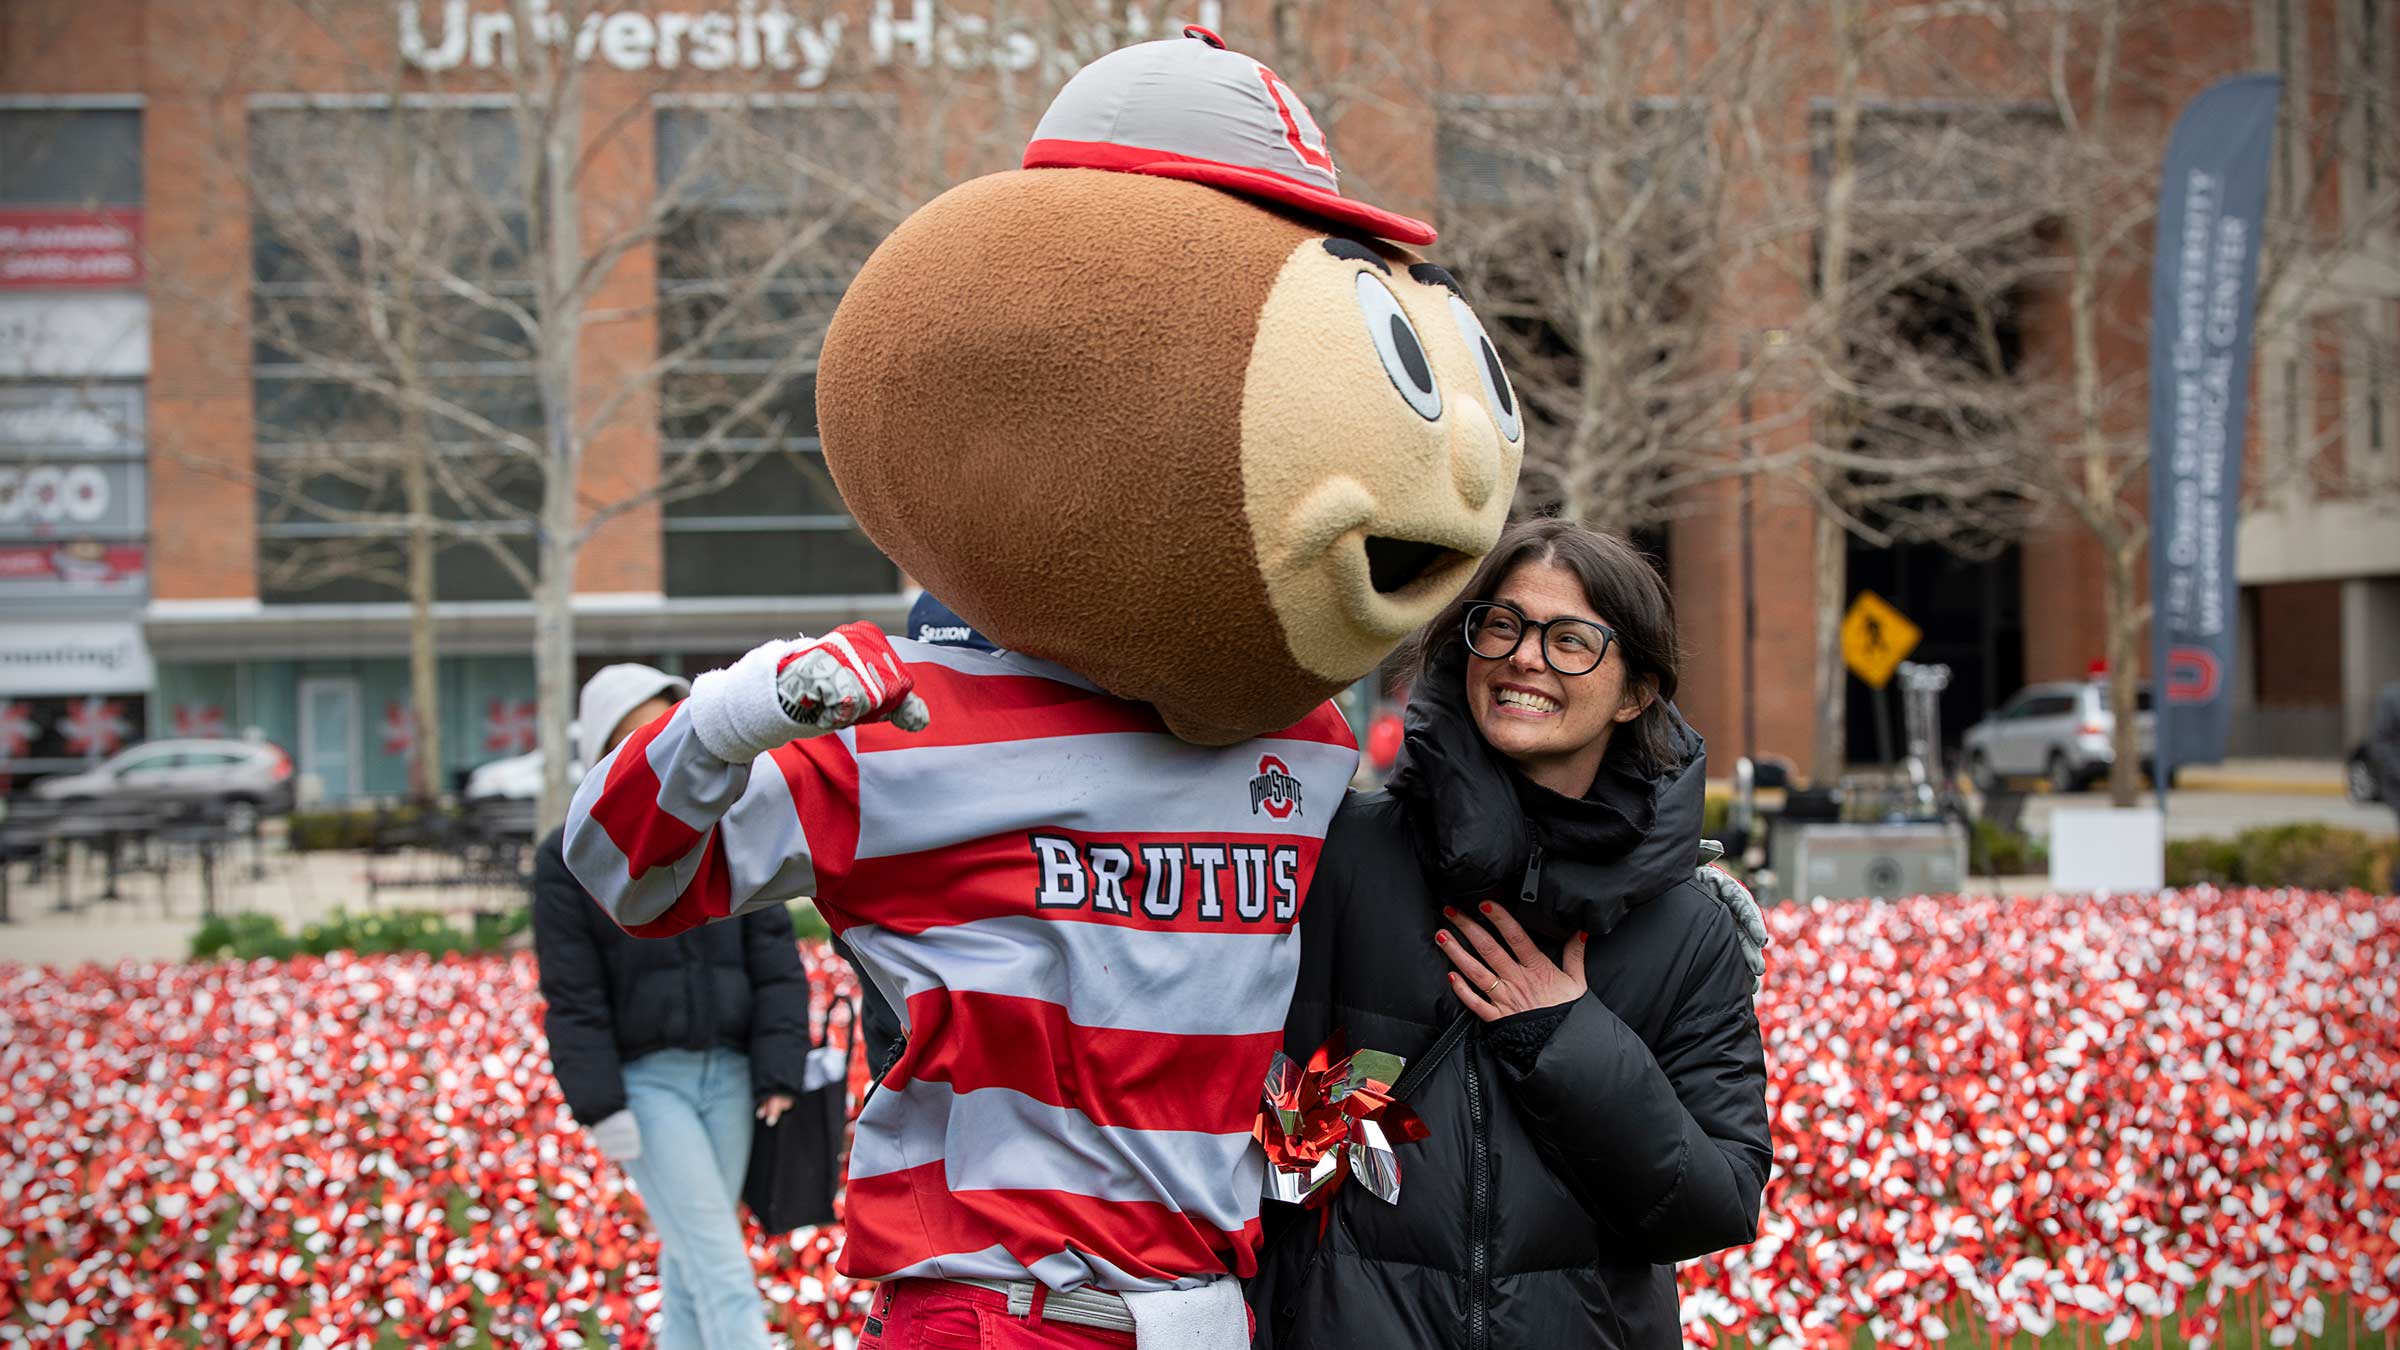 Brutus hugging a lady in a field of pinwheels